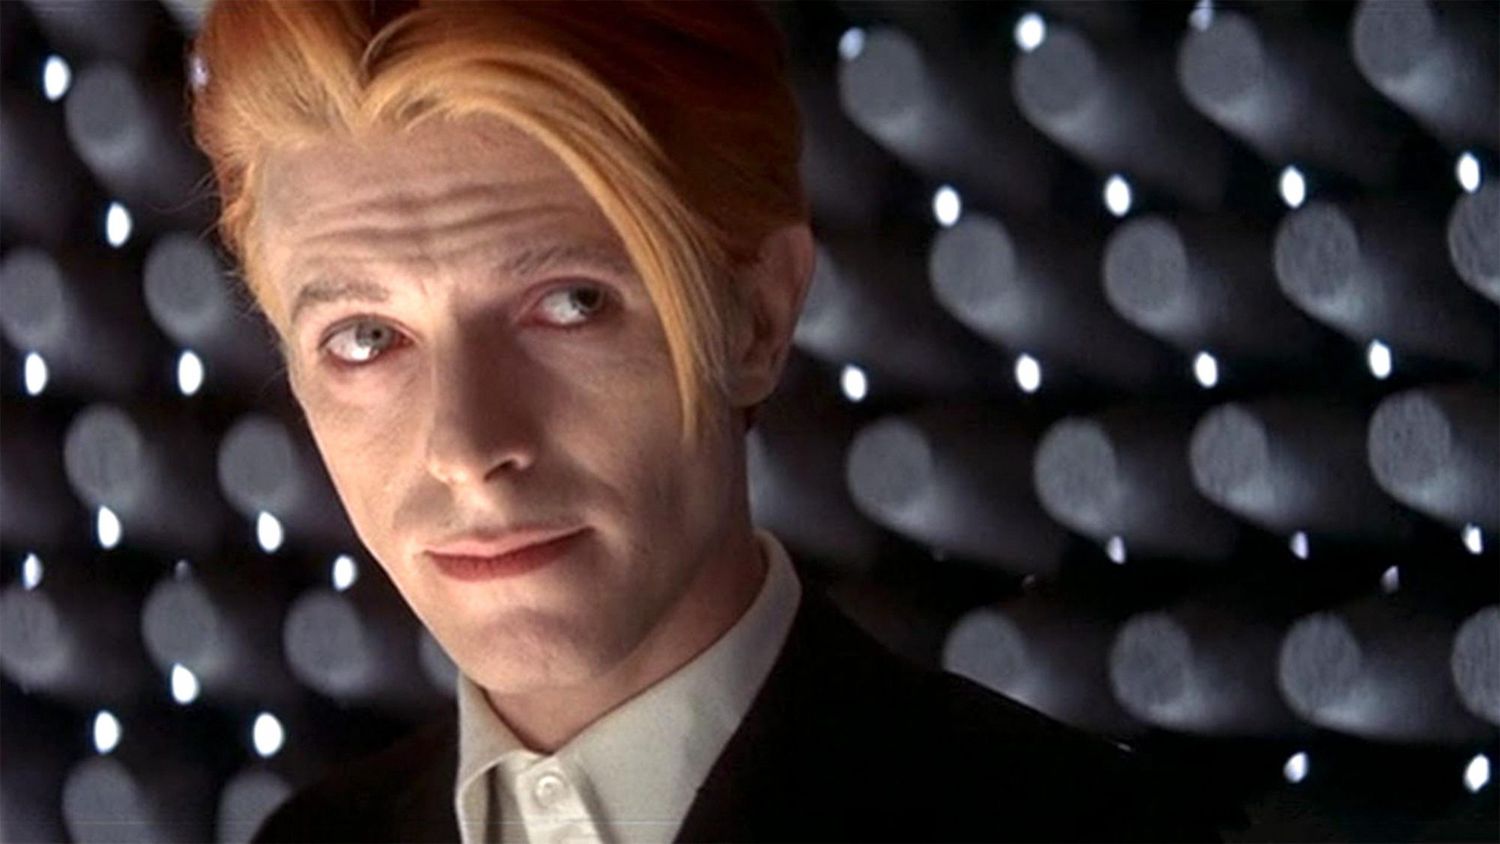 The Man Who Fell to Earth (1976) (screen grab) David Bowie CR: British Lion Films